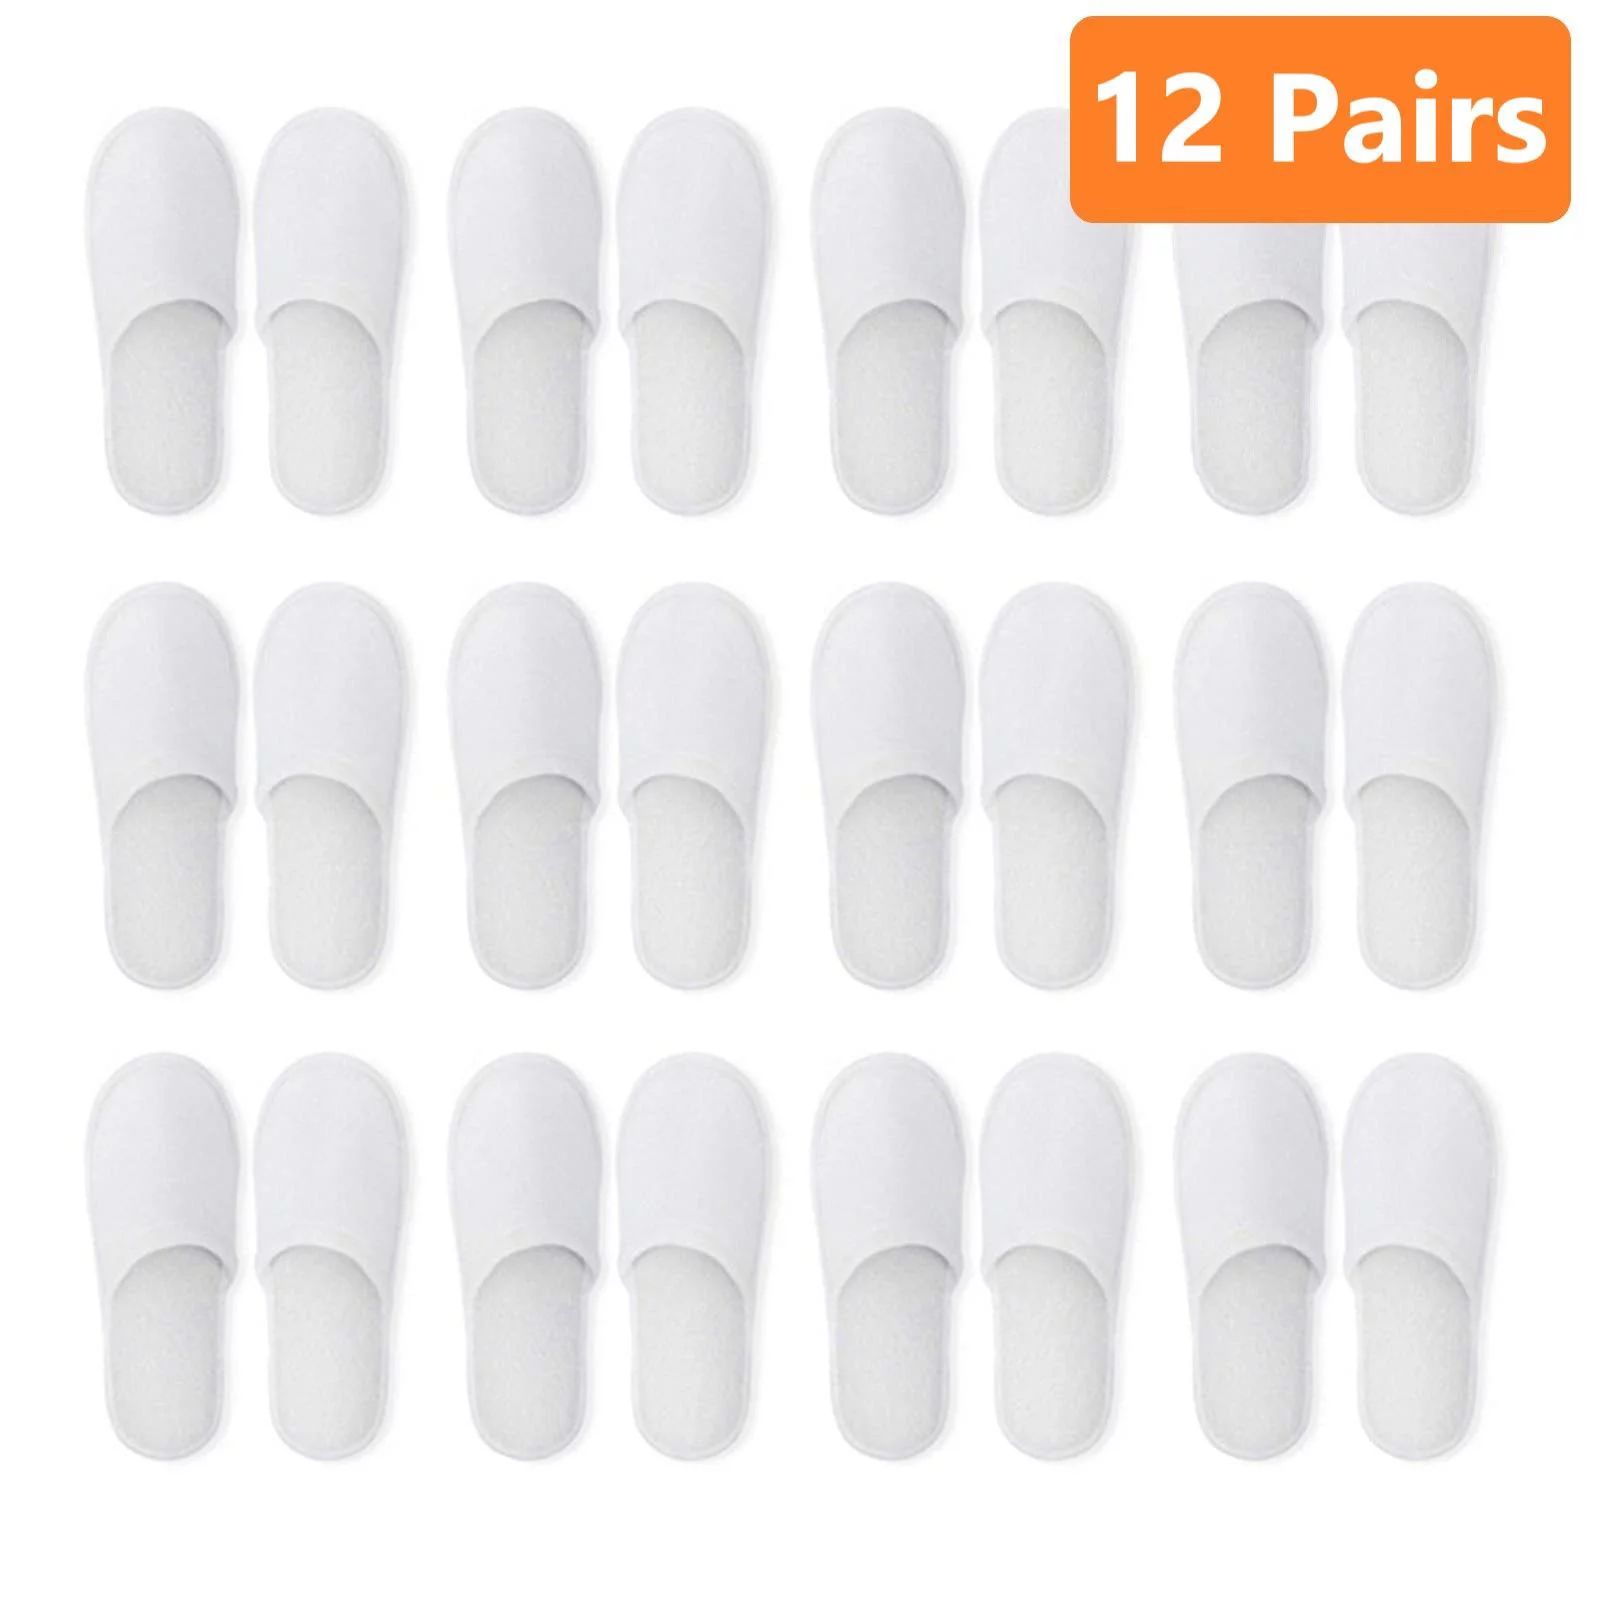 12 Pairs Spa Slippers, Cotton Velvet Closed Toe Disposable Slippers, Fit Size for Men and Women f... | Walmart (US)